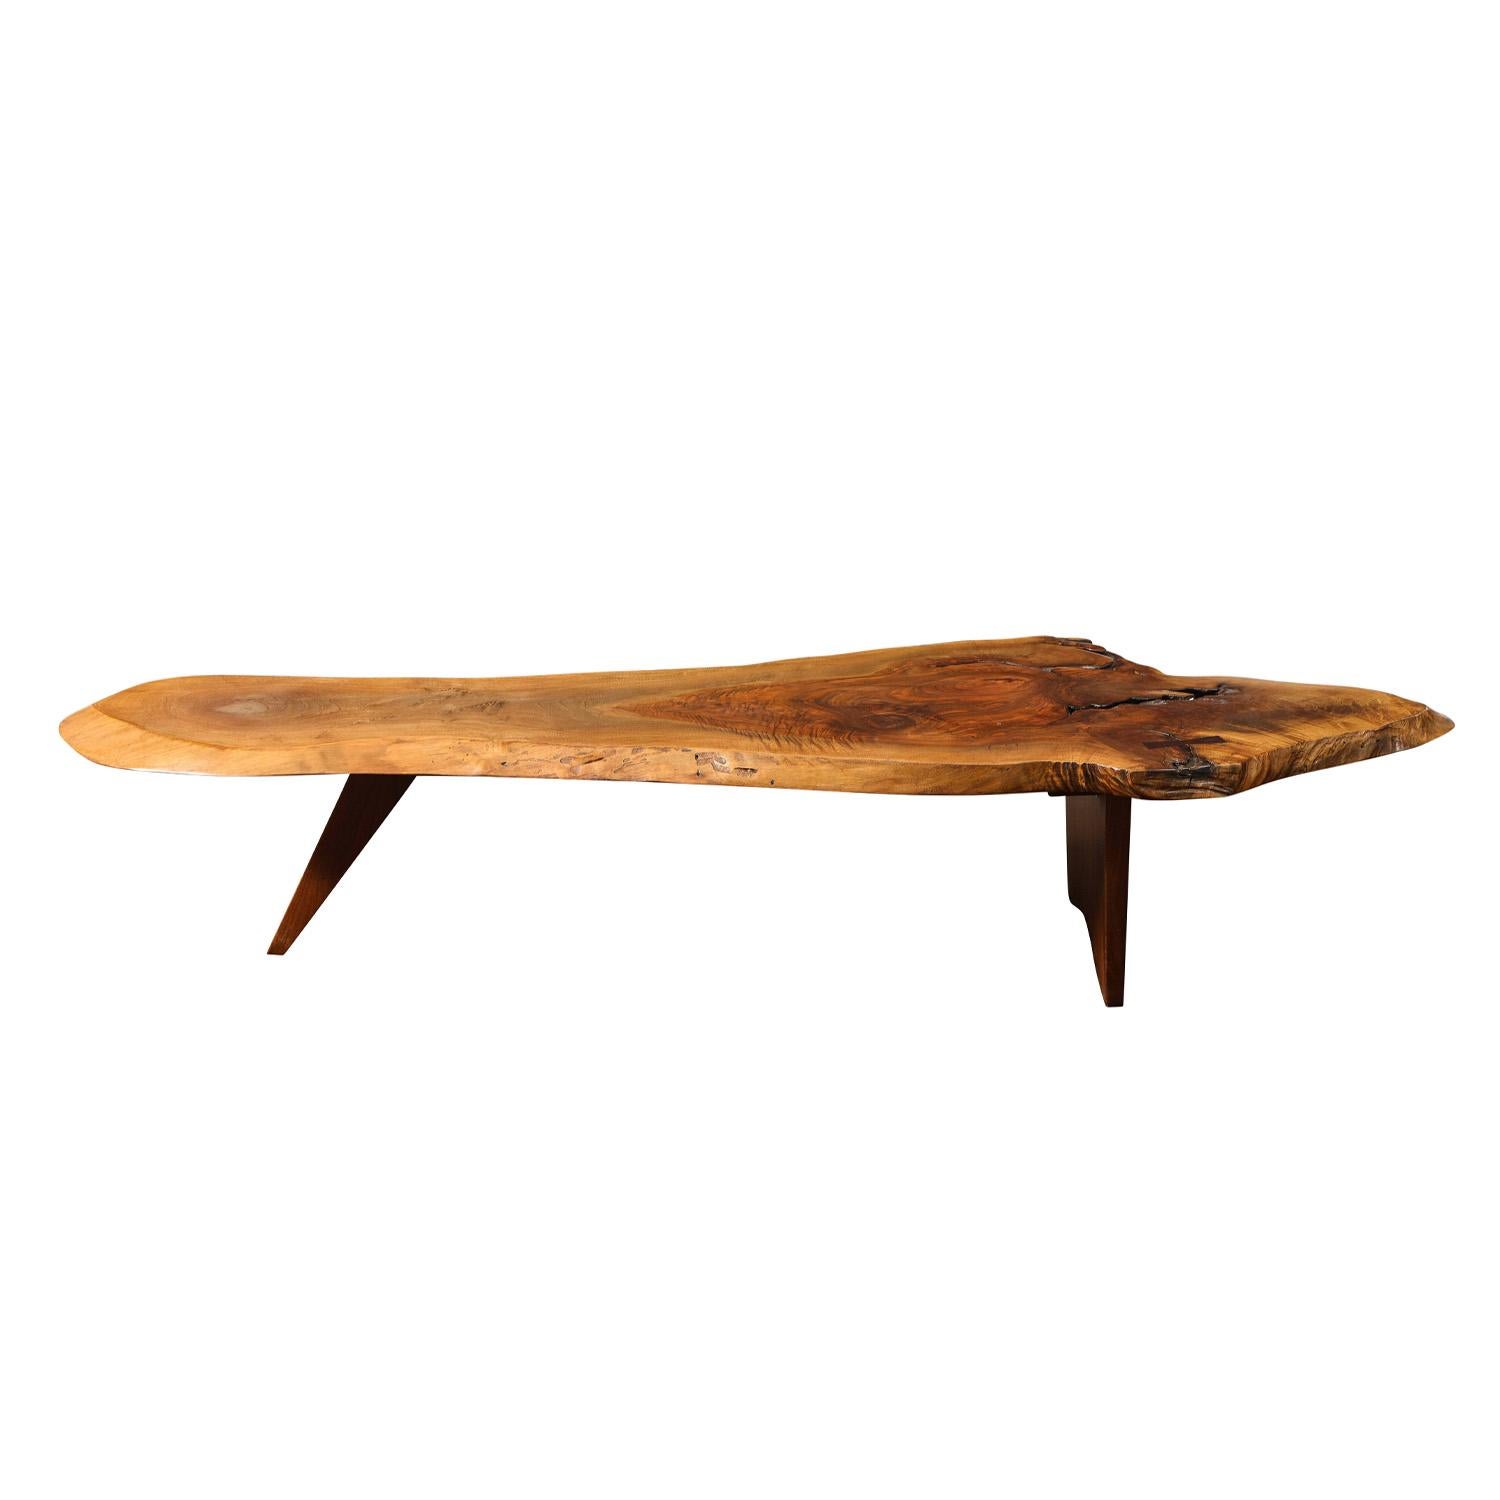 Free Edge Slab Coffee Table in English walnut with rosewood butterfly by George Nakashima, American 1950's. Table features a single slab top with free edges, expressive figured grain, and one rosewood butterfly. A beautiful example of George